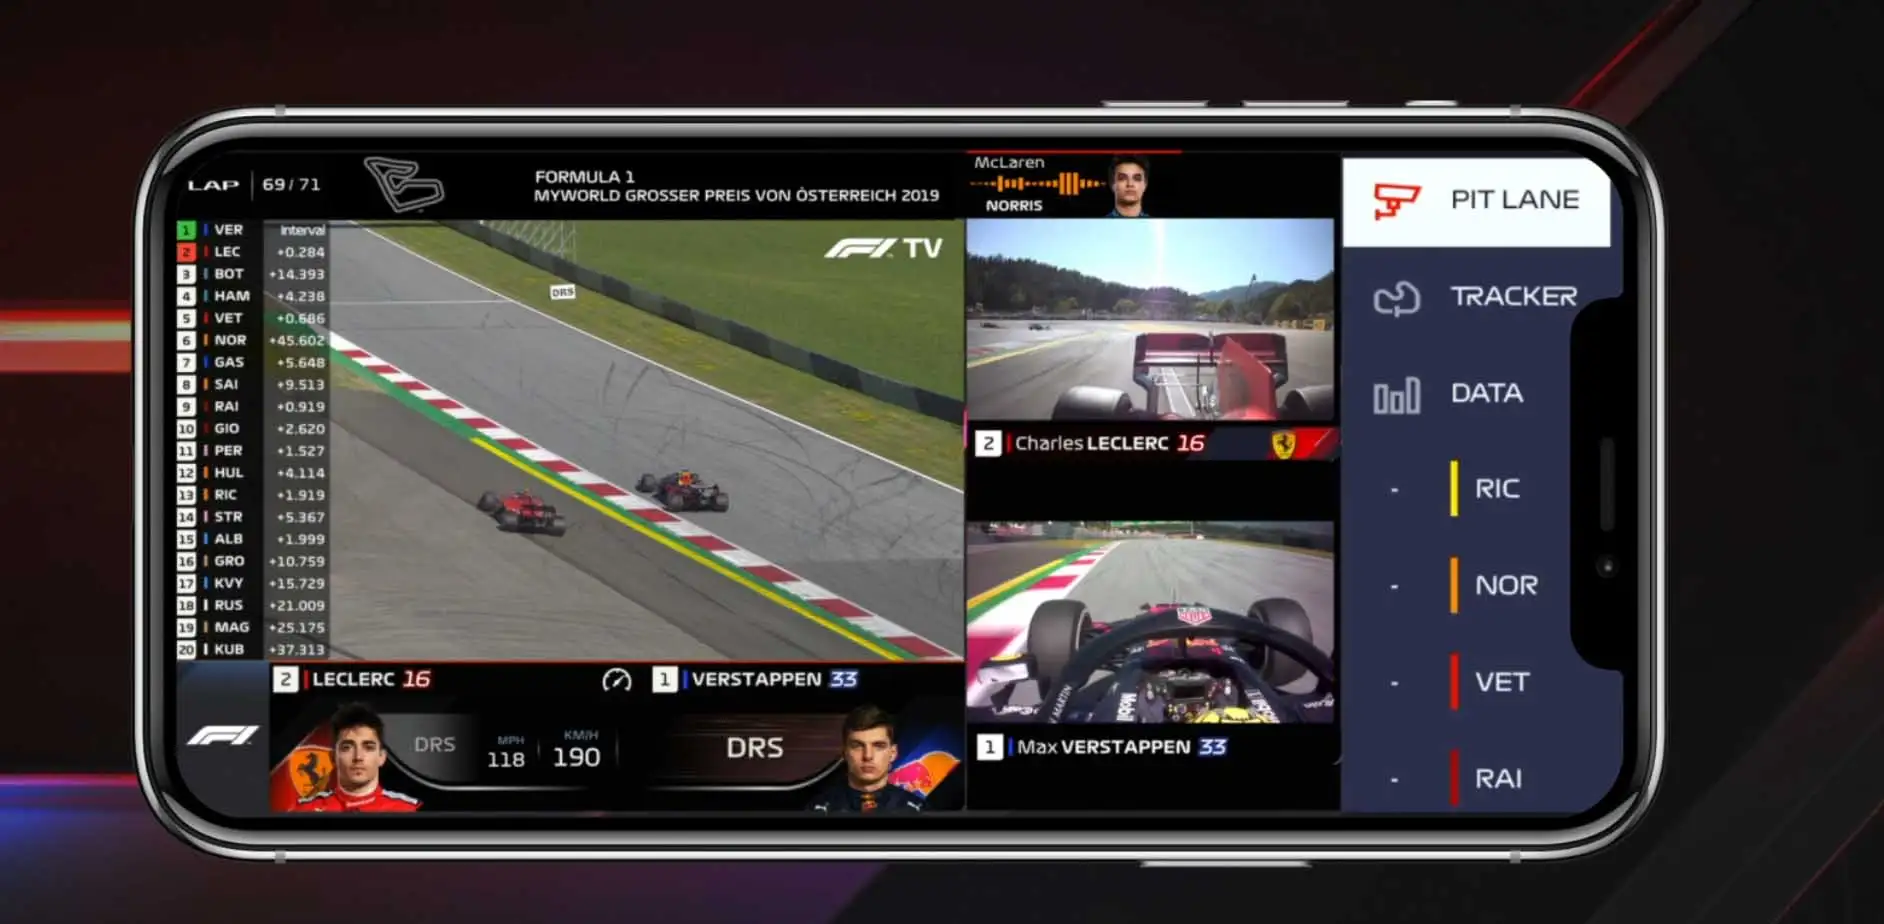 Get 25% off monthly F1 TV plans for three months!